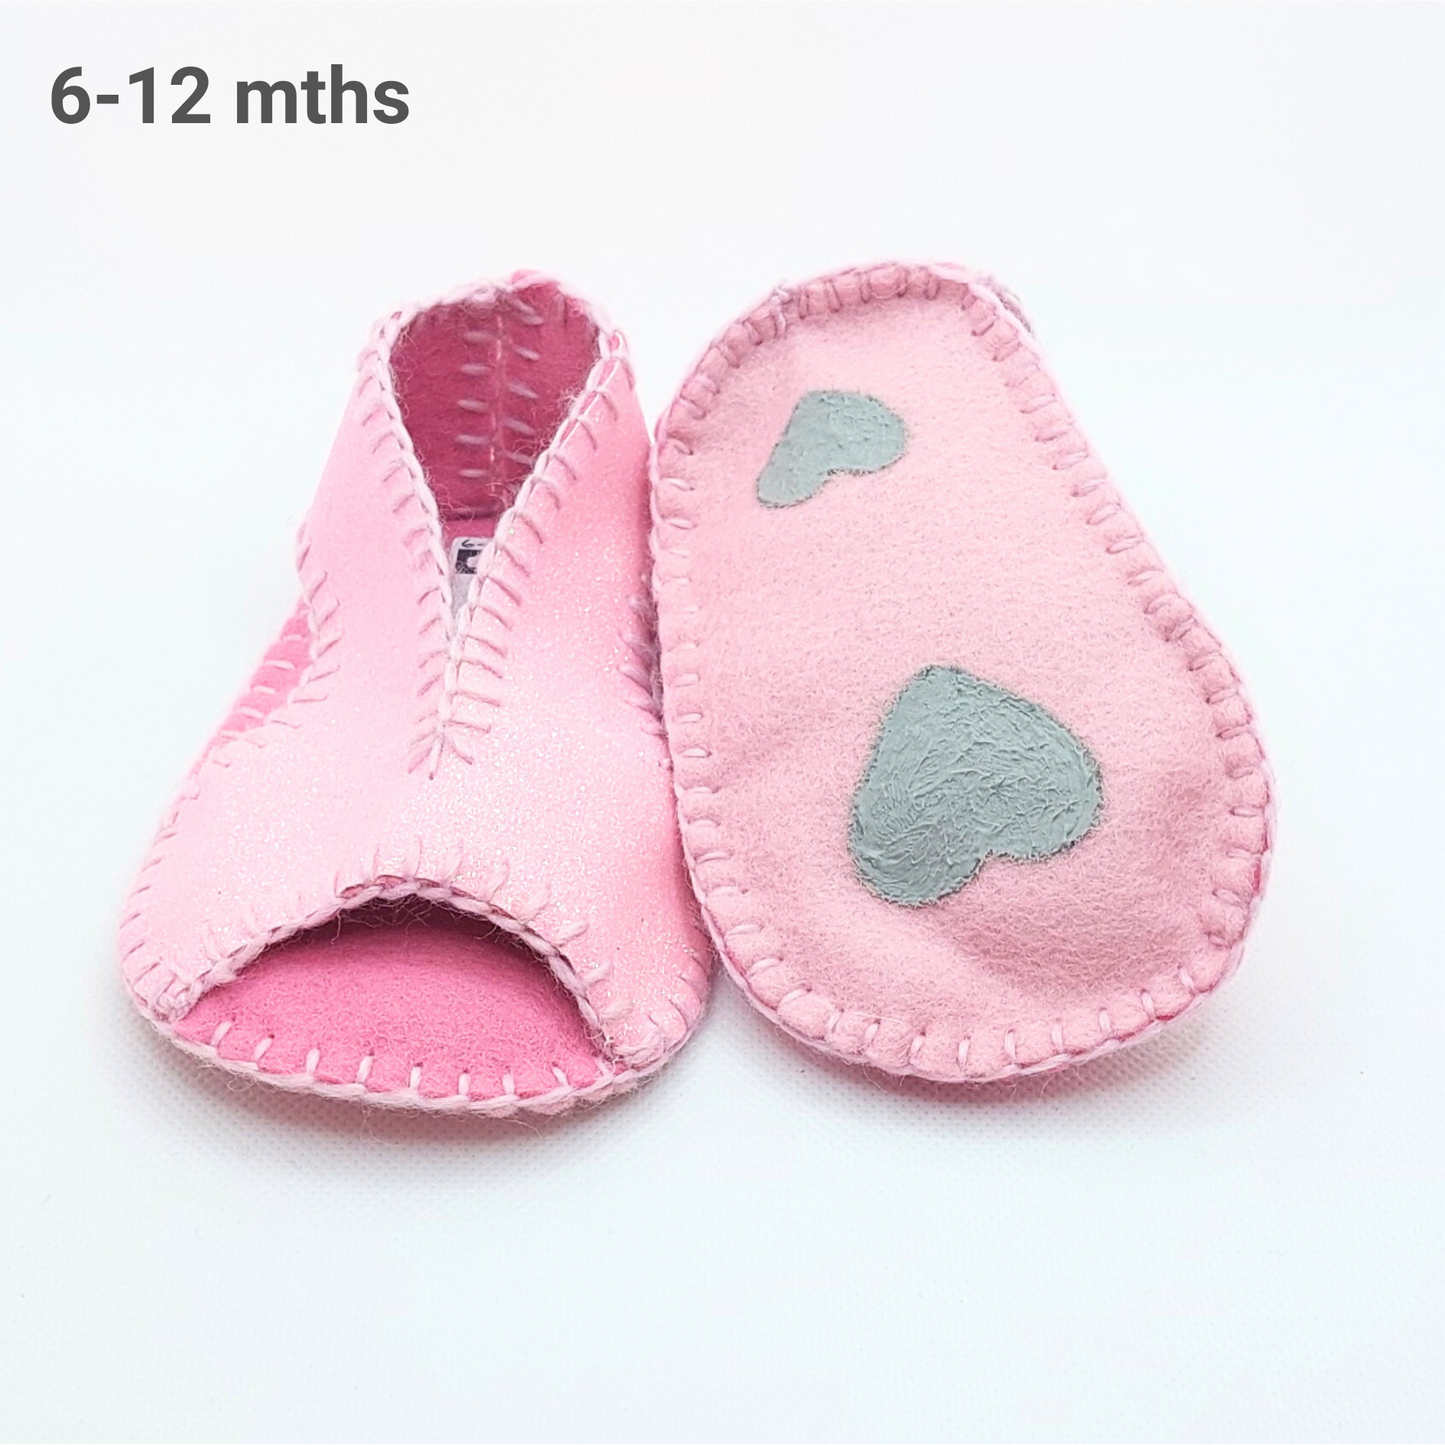 COTTON CANDY - Baby Slippers - Sandals (6-12 mths)